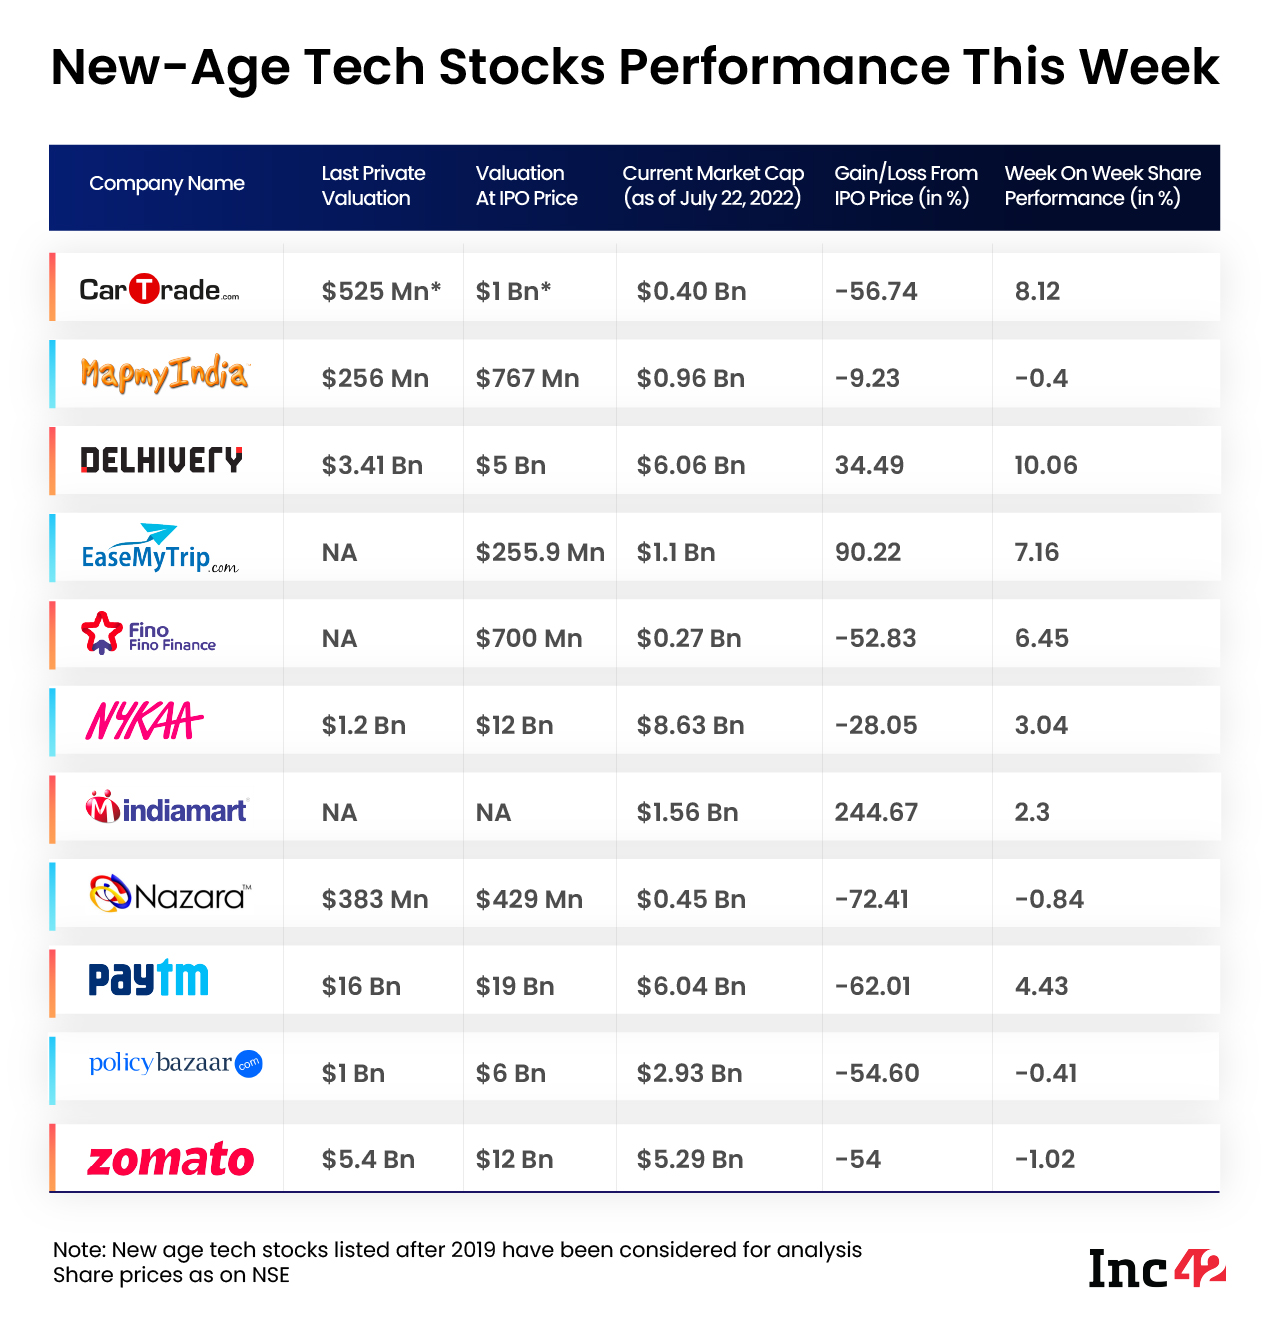 Weekly Performance Of New-Age Tech Stocks: Delhivery, EaseMyTrip Win Big